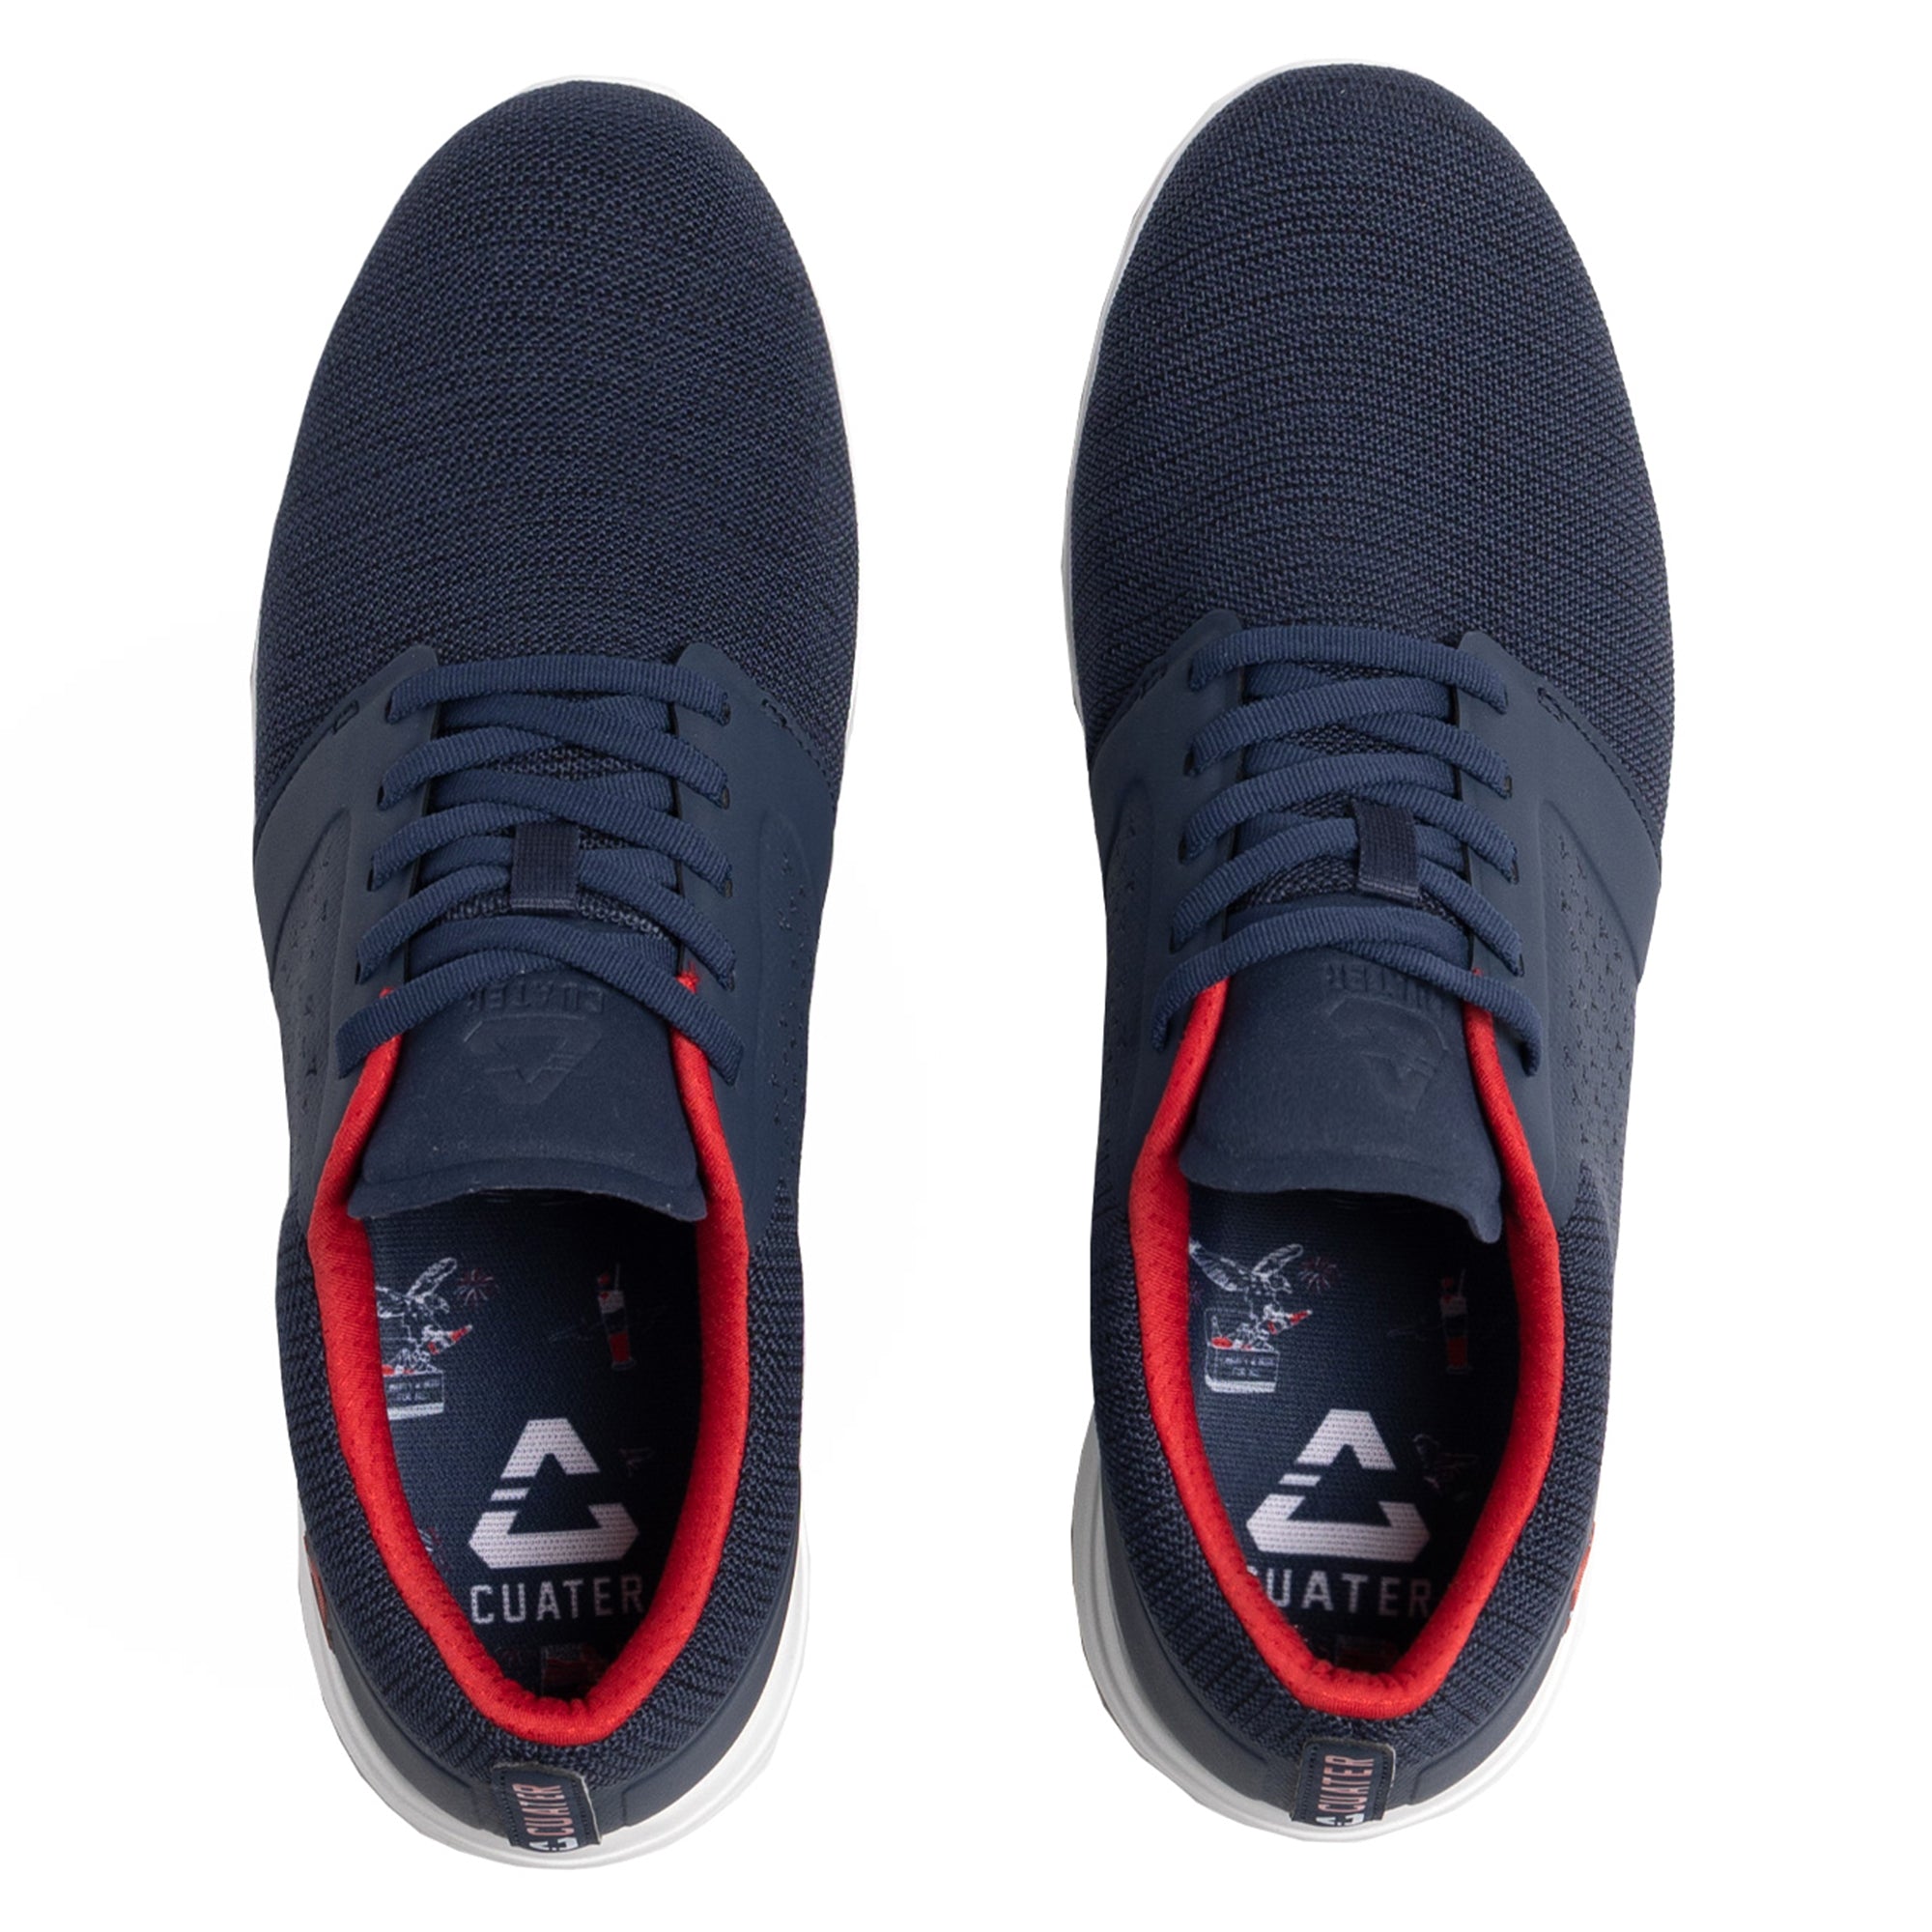 cuater-the-money-maker-golf-shoes-4mr216-navy-red-function18